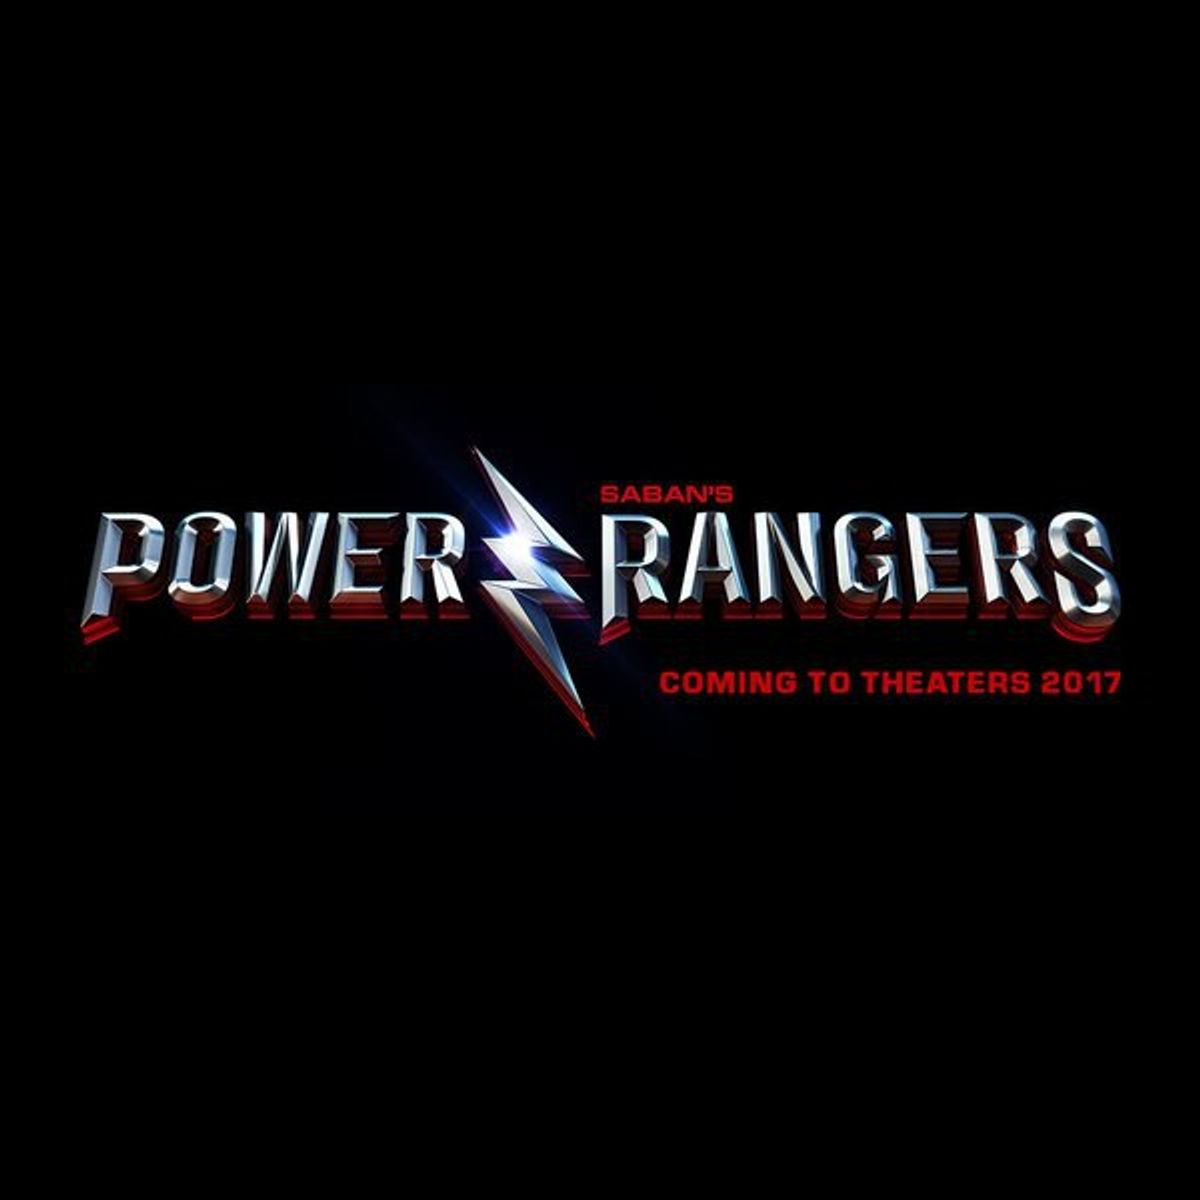 5 Things I Want To See In The New Power Rangers Film